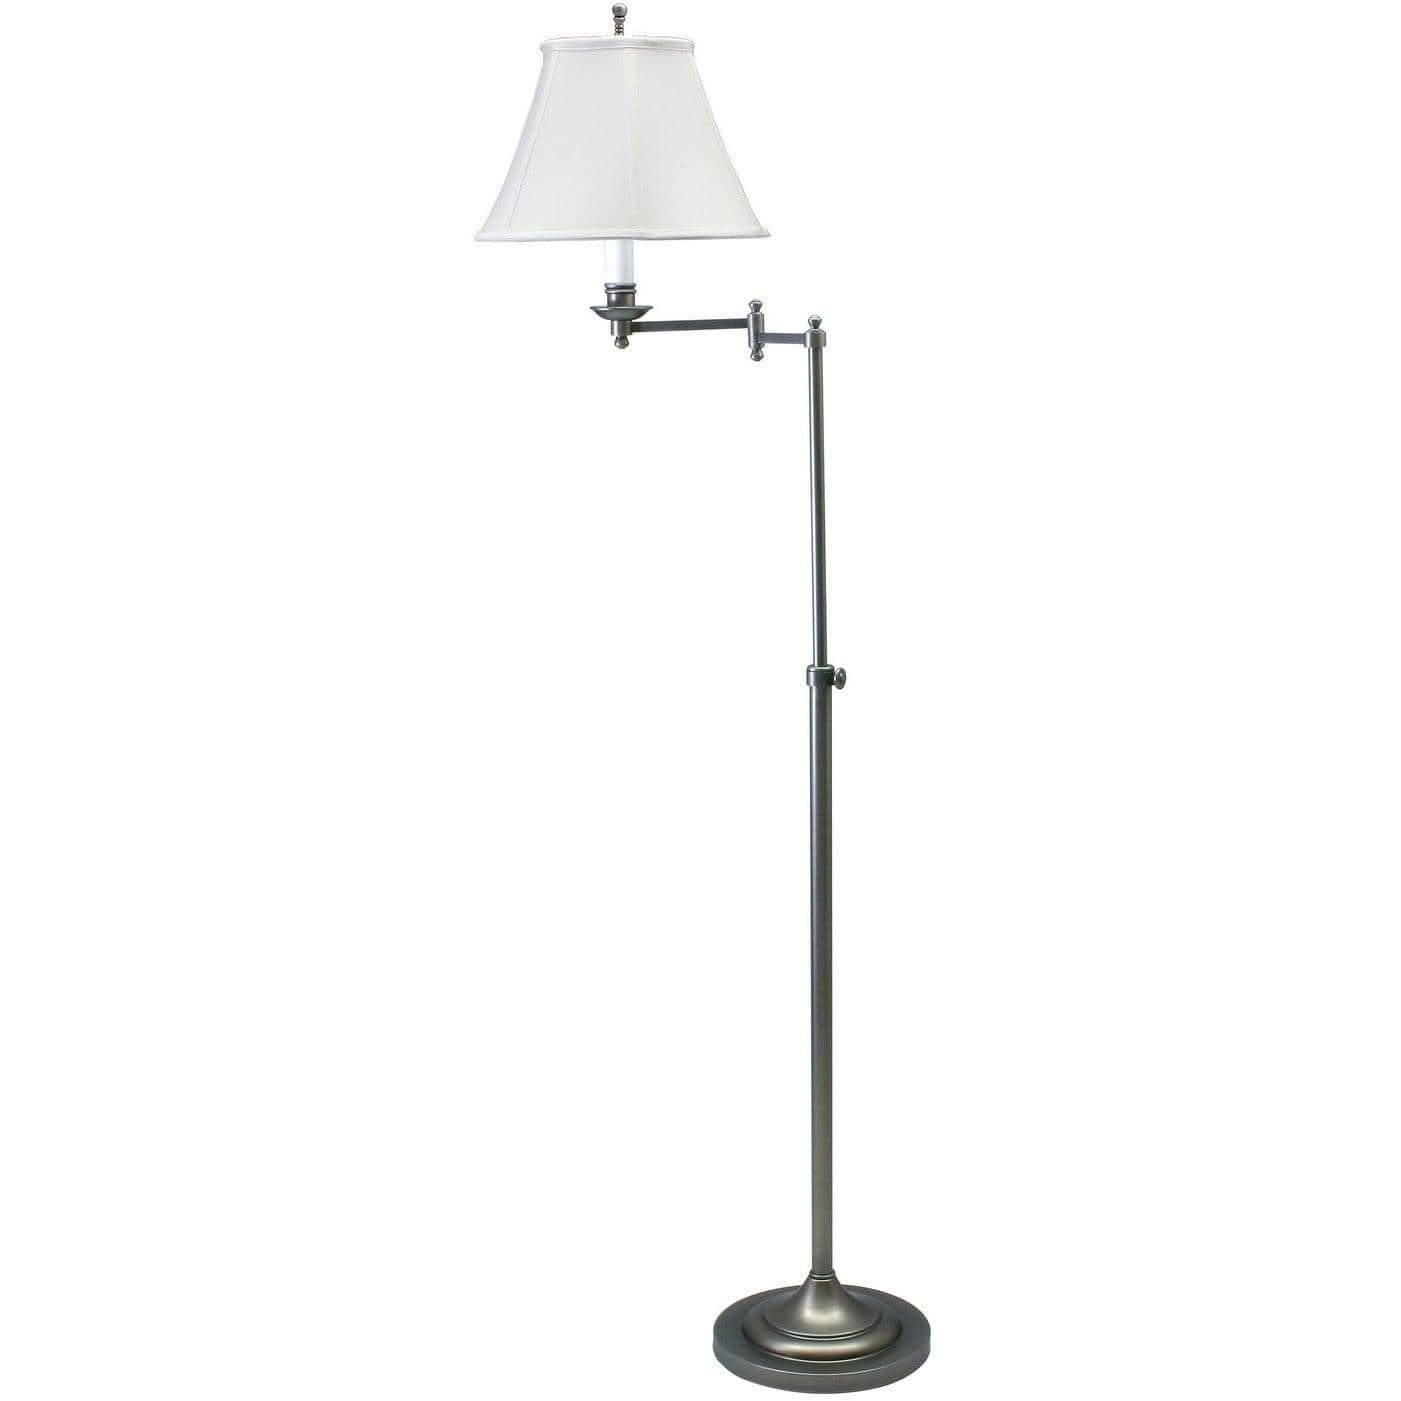 House of Troy - Club One Light Floor Lamp - CL200-AS | Montreal Lighting & Hardware